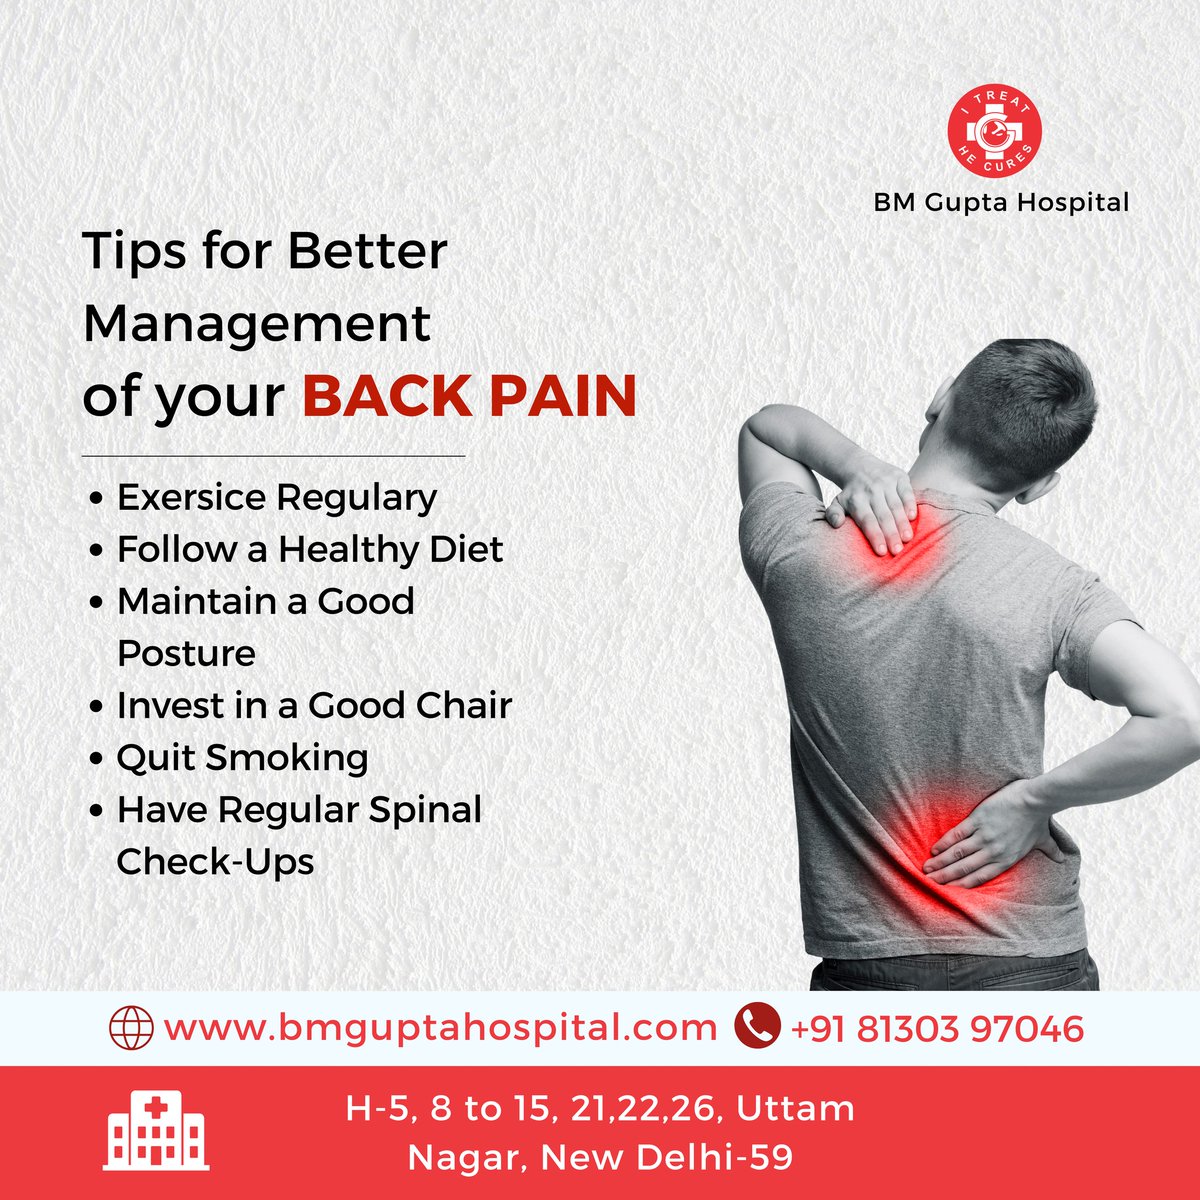 Tips for better management of your back pain. For more info Call us at 91 81303 97046 Mail us: bmguptagnh@gmail.com #BMGH #BMGuptaHospital #health #healthcare #BackPainManagement #ExerciseRegularly #HealthyDiet #GoodPosture #SupportiveChair #QuitSmoking #SpinalCheckUps